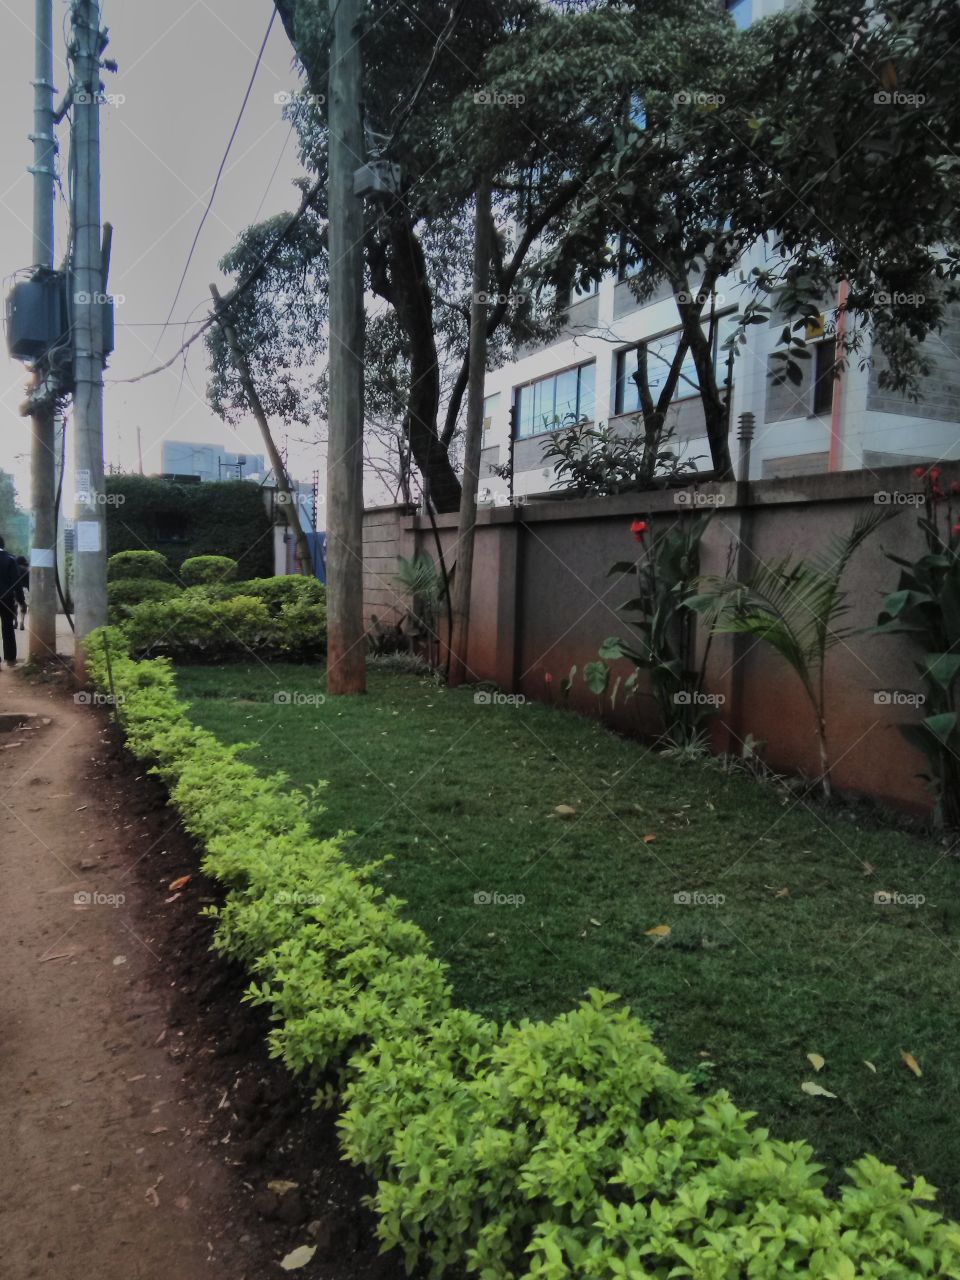 This photo shows a well maintained green garden at the entrance of residential apartments.